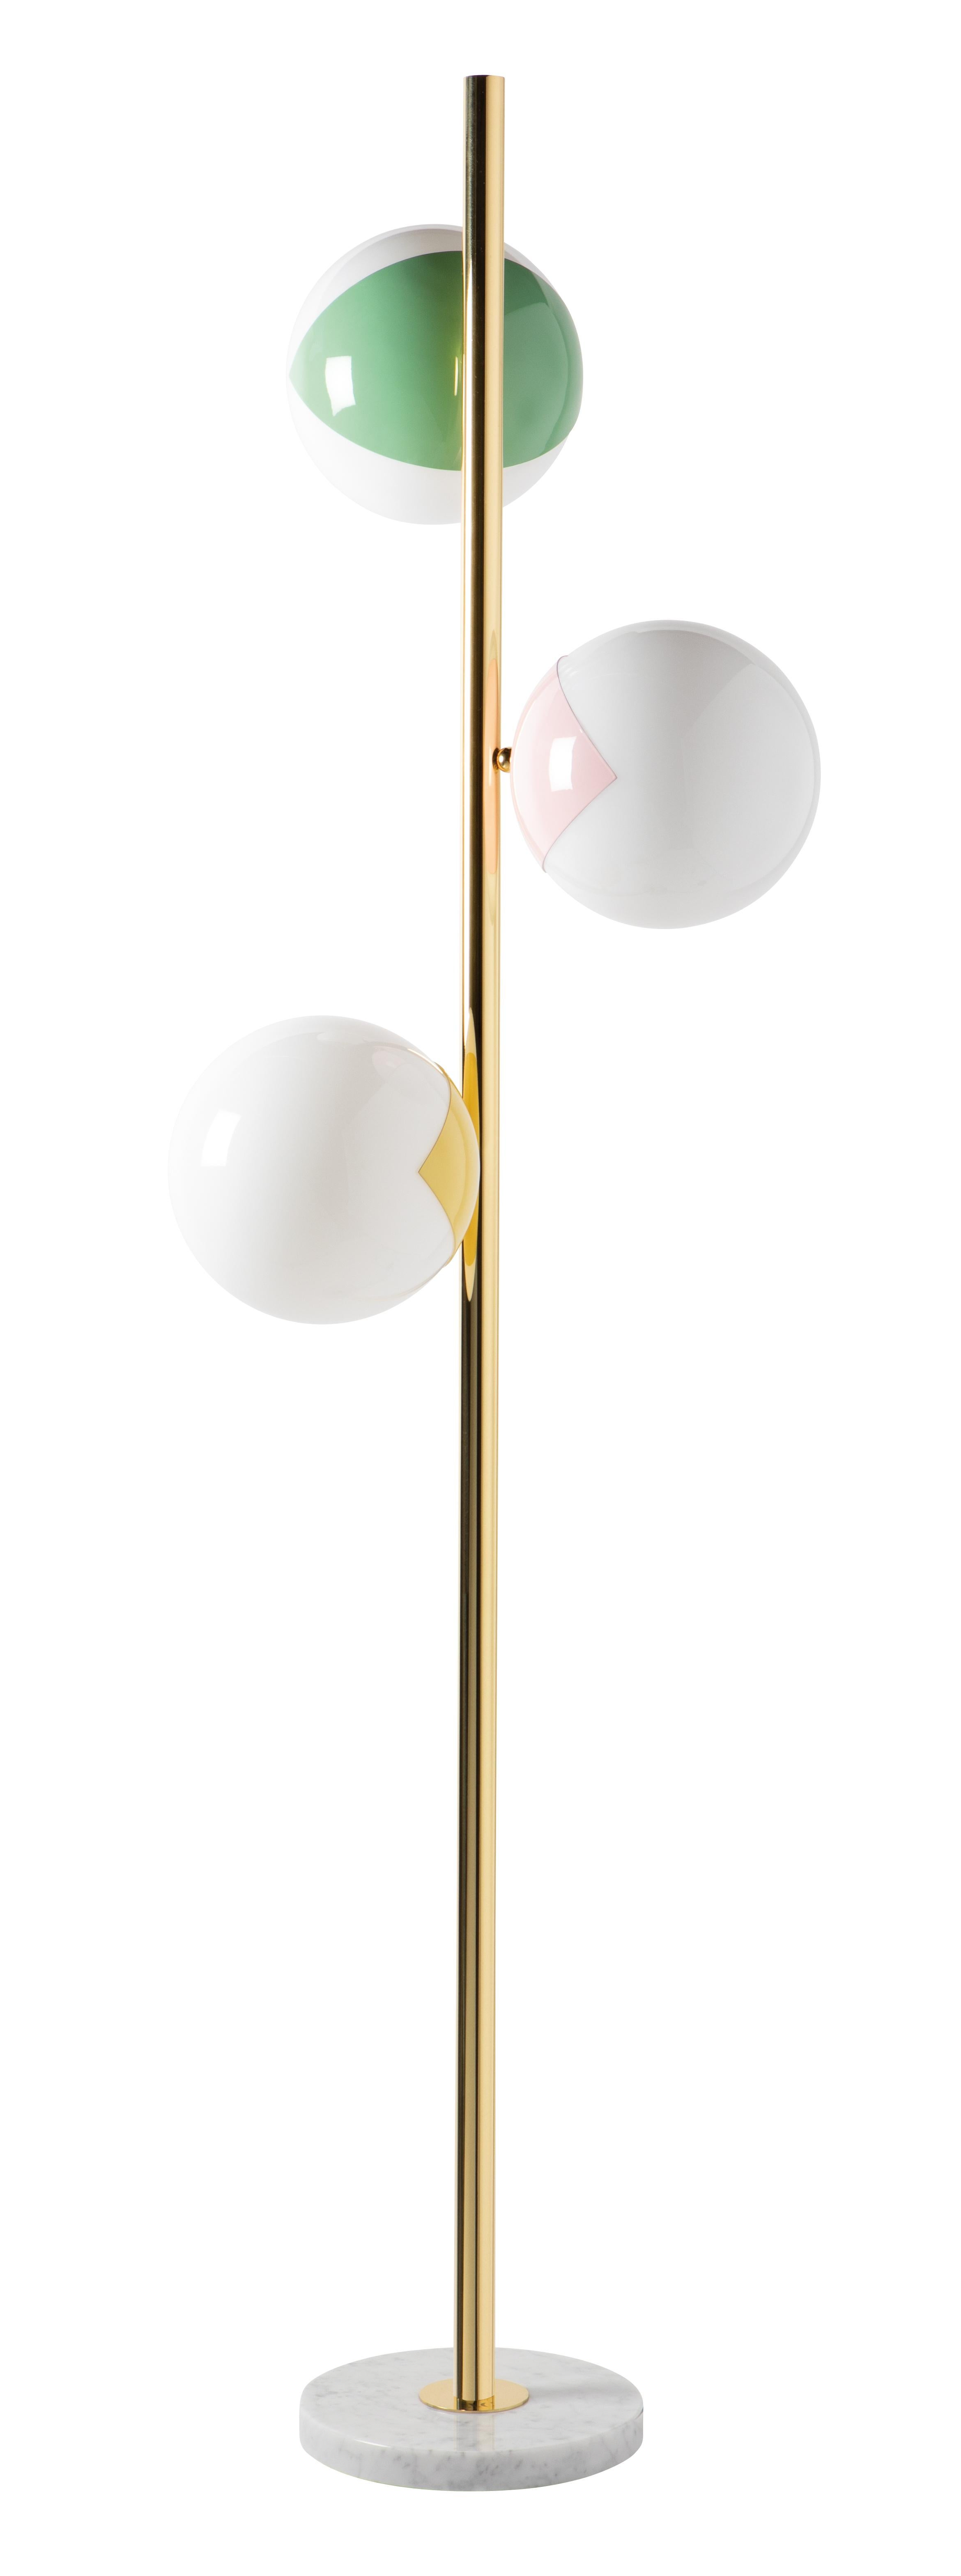 Pop up floor lamp by Magic Circus Editions
Dimensions: W 170 x H 51 cm
 diameter sphere 22 cm
Materials: Carrara marble base, smooth brass tube, glossy mouth blown glass

Available finishes: Matte black tube and brass, matte black tube and